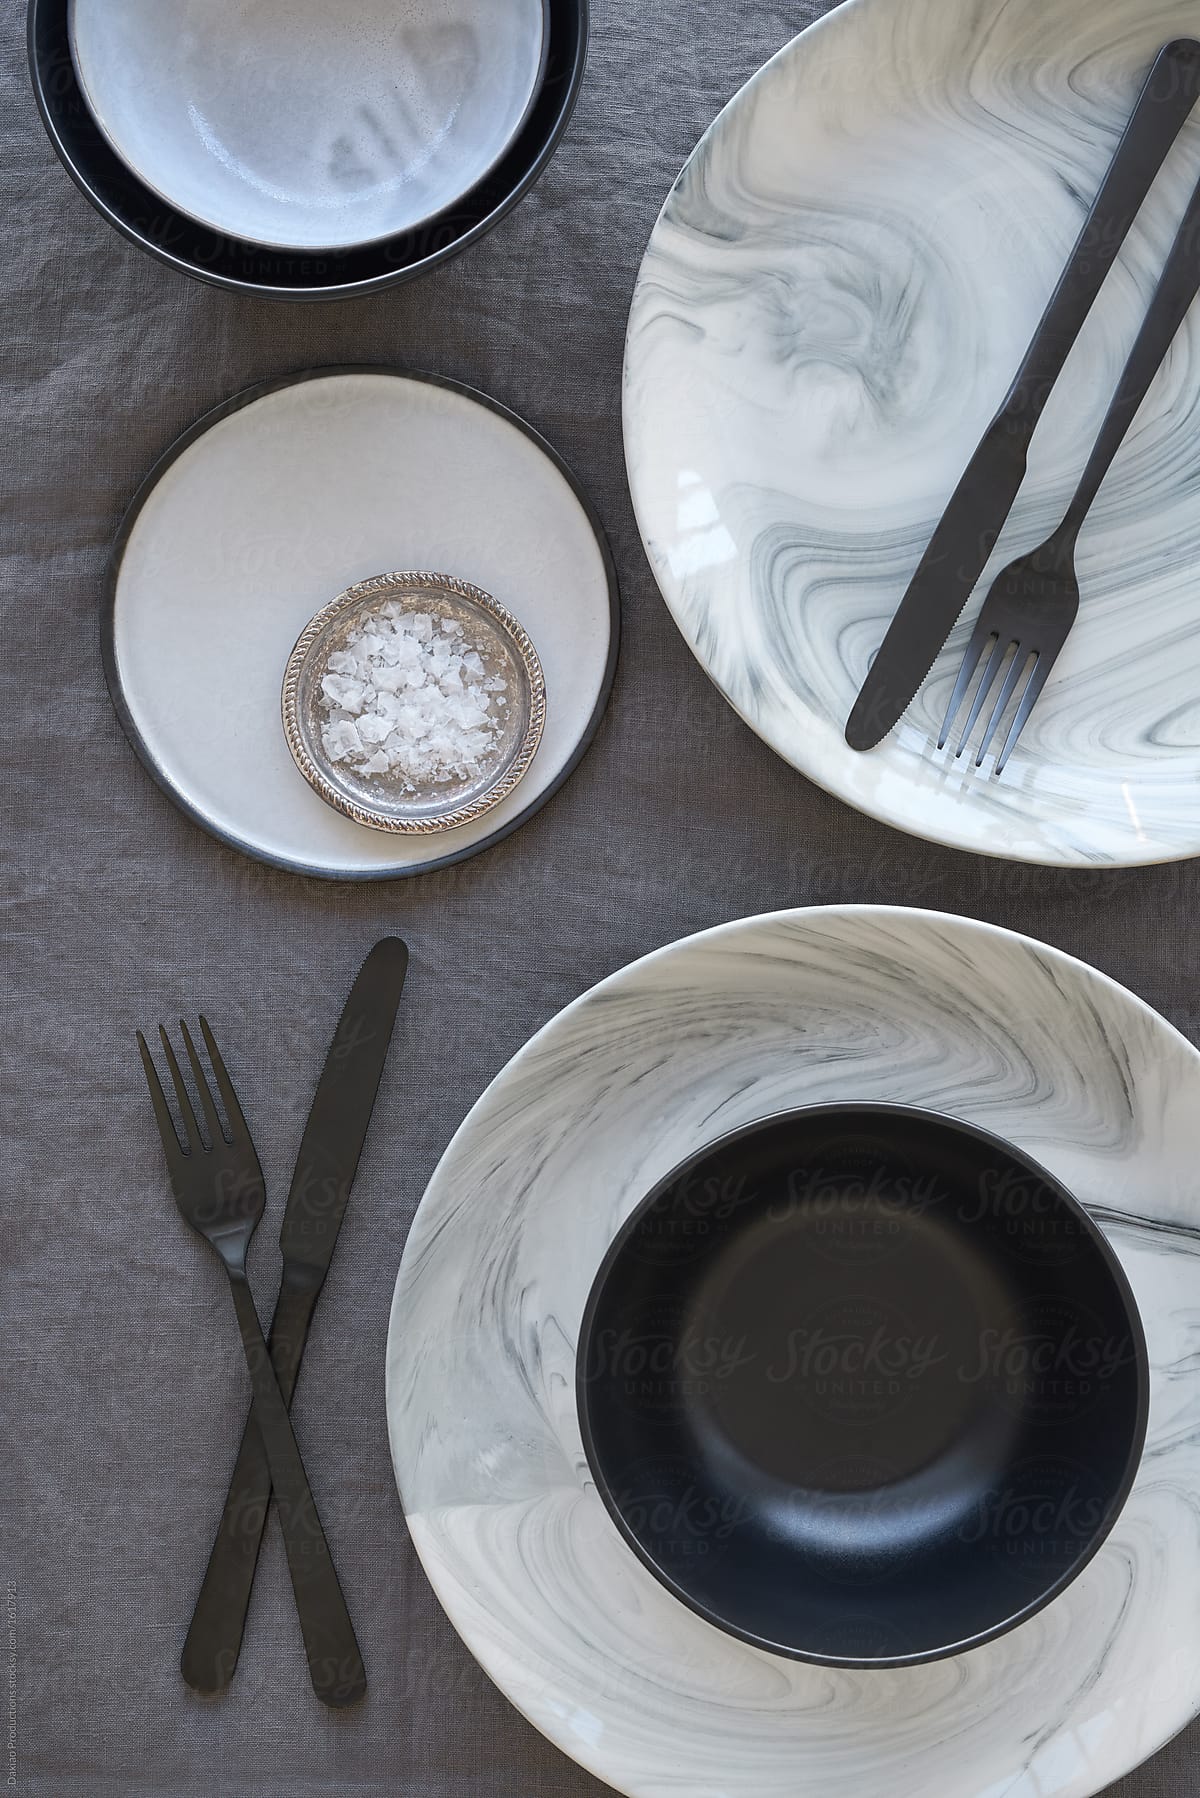 Black grey and marbled place setting